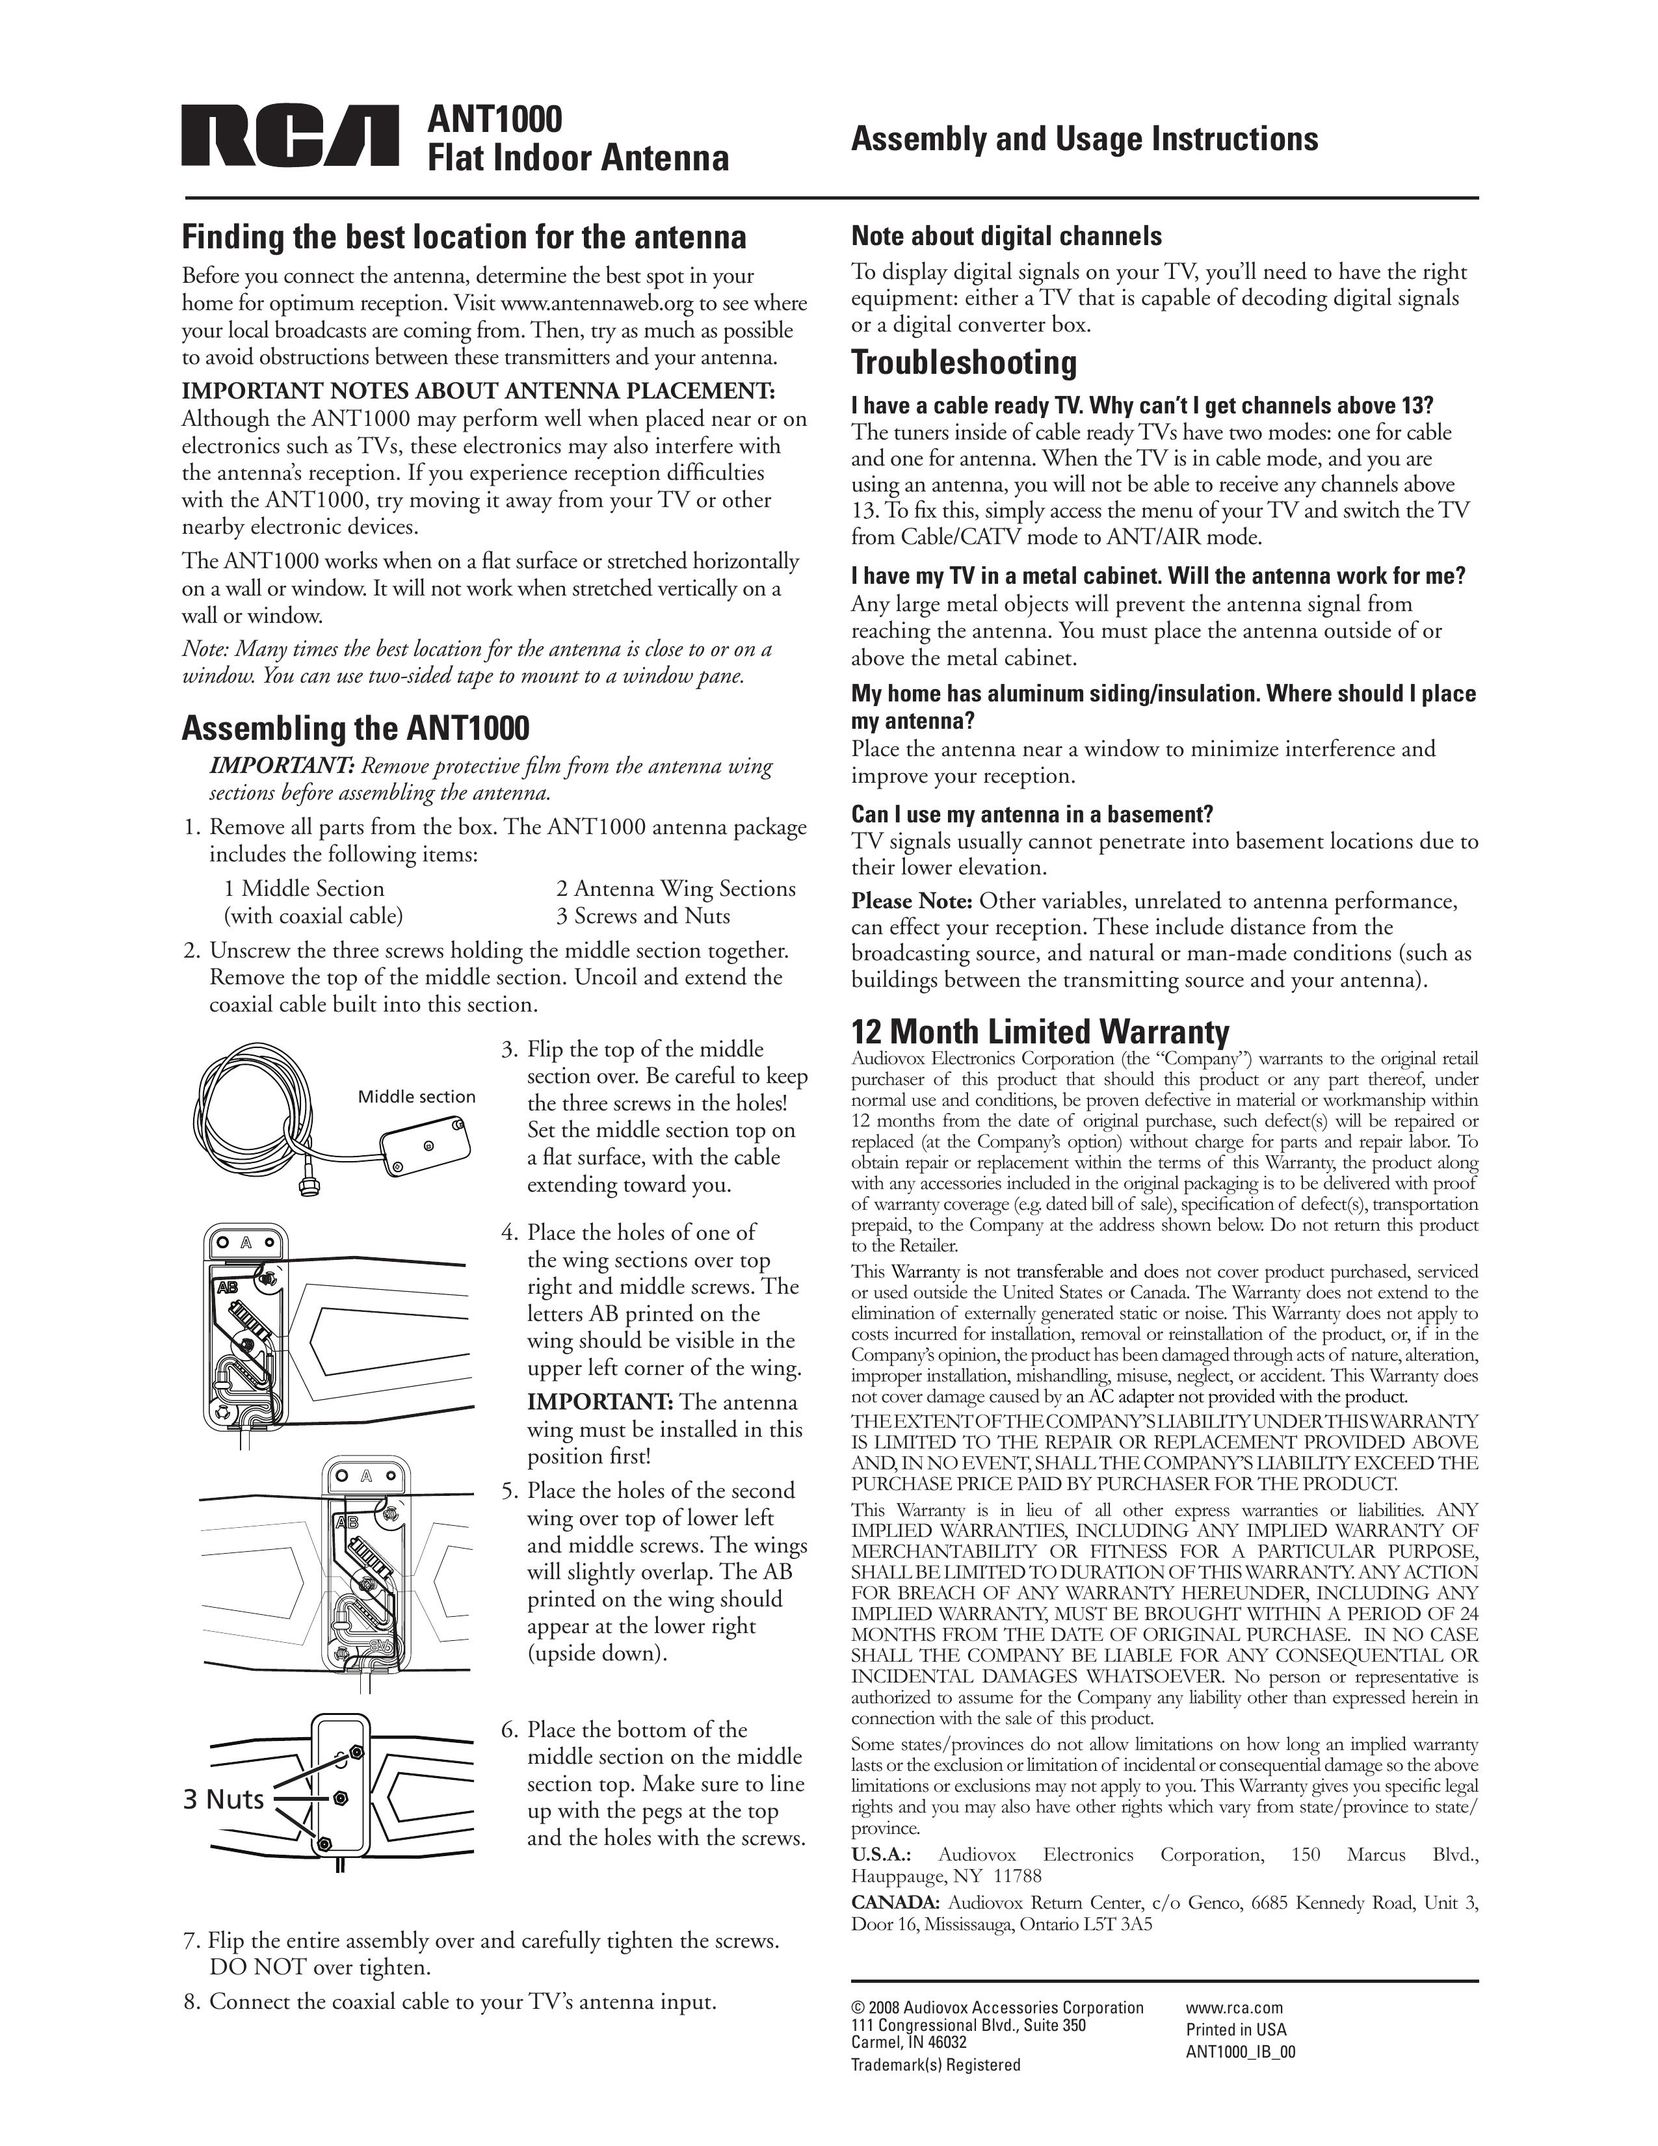 RCA ANT1000 Car Stereo System User Manual